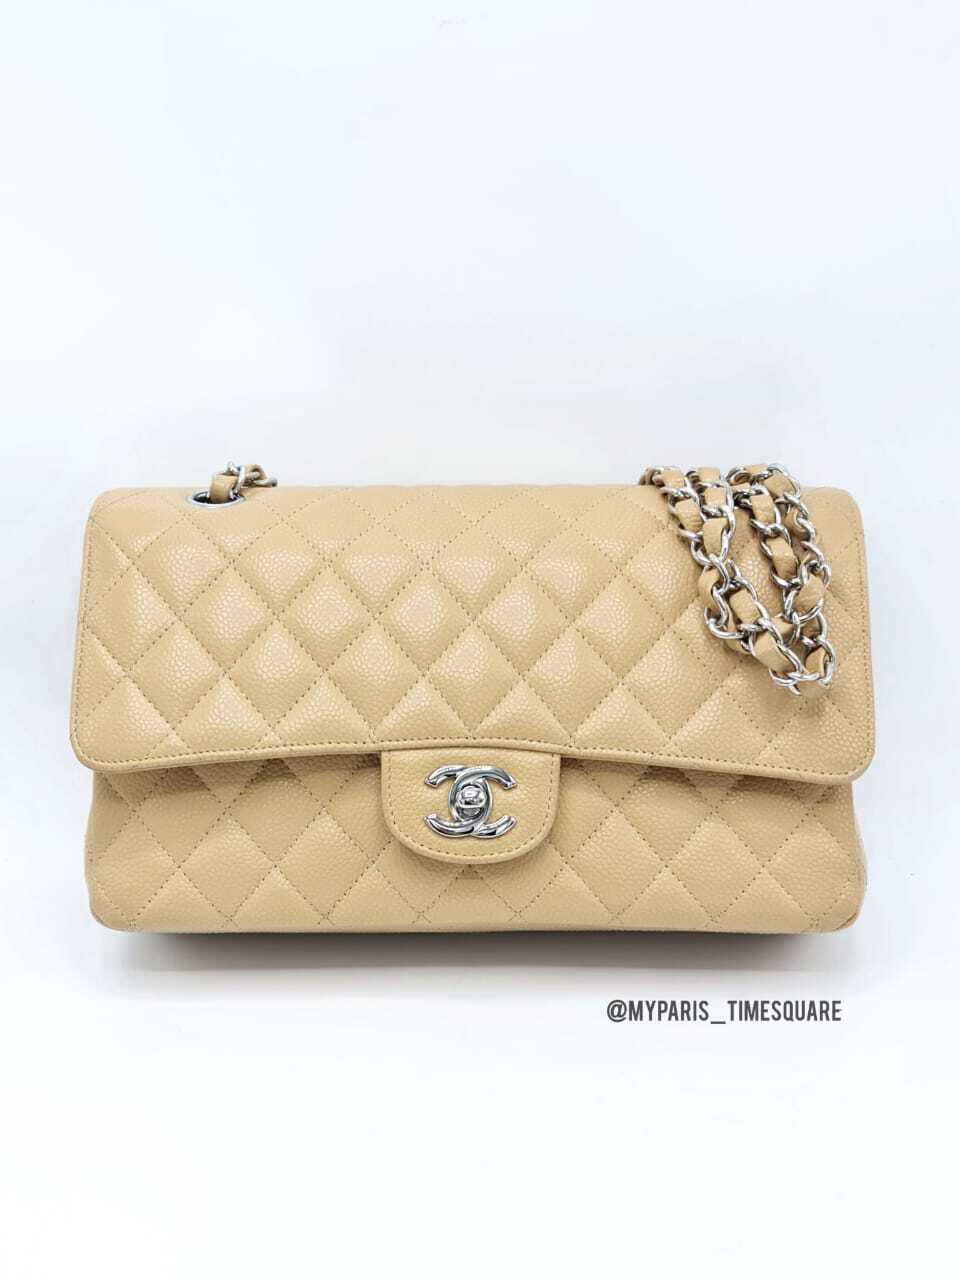 CHANEL Classic Lambskin Double Chain Double Flap Bag Black Medium Square  gold hardware  Preloved Lux Canada AUthentic